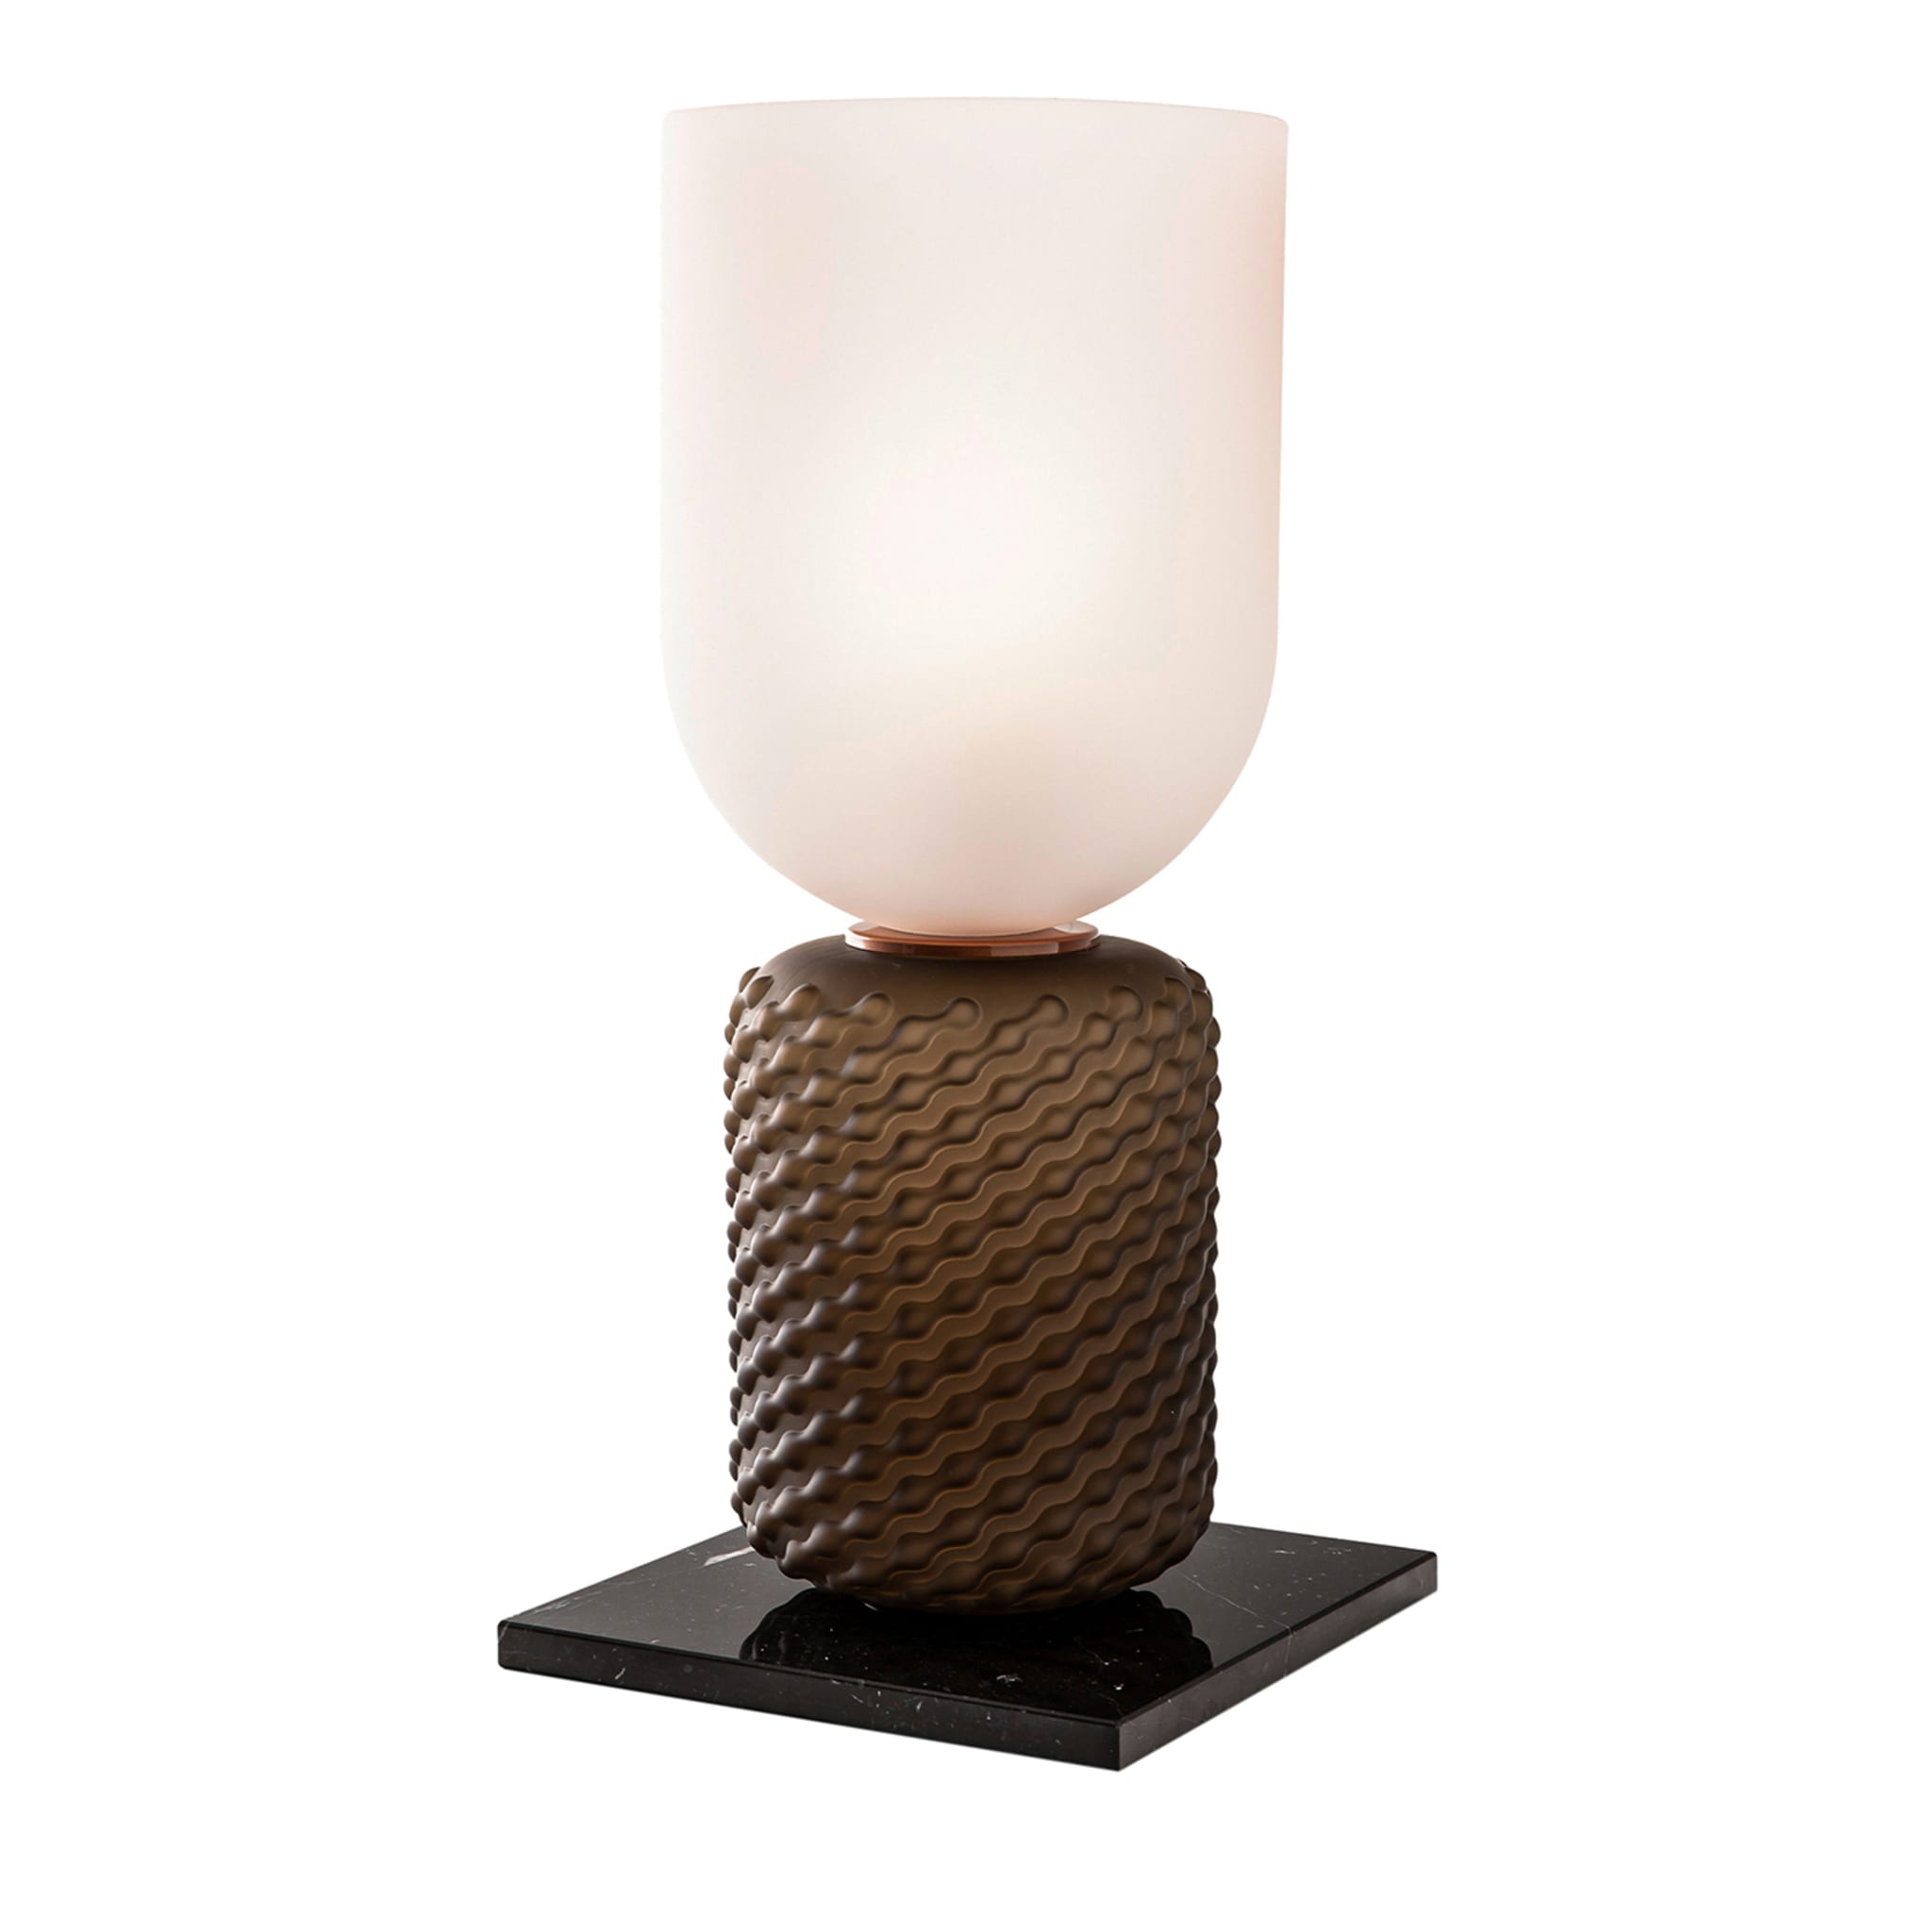 Ficupala by Cassina - Table lamp #2 - Alternative view 1